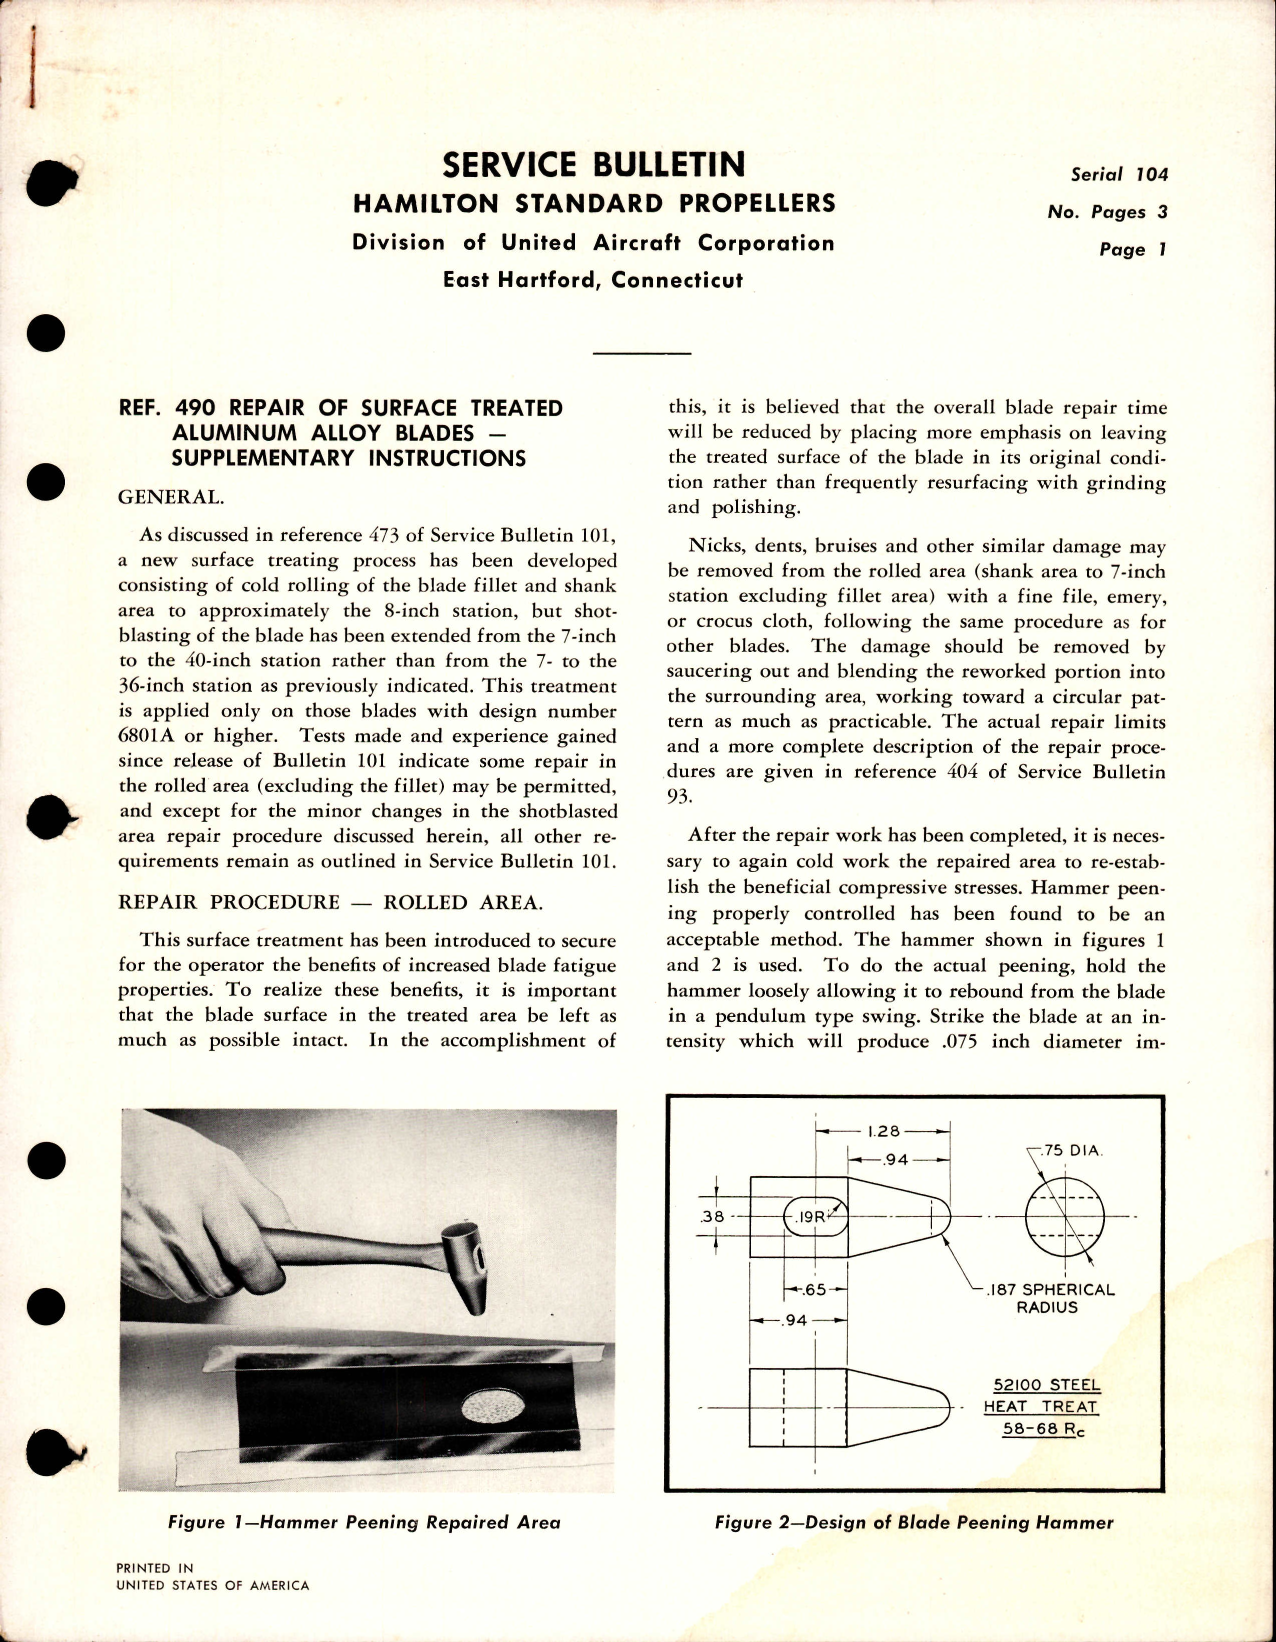 Sample page 1 from AirCorps Library document: Repair of Surface Treated Aluminum Alloy Blades - Supplementary Instructions, Ref 490